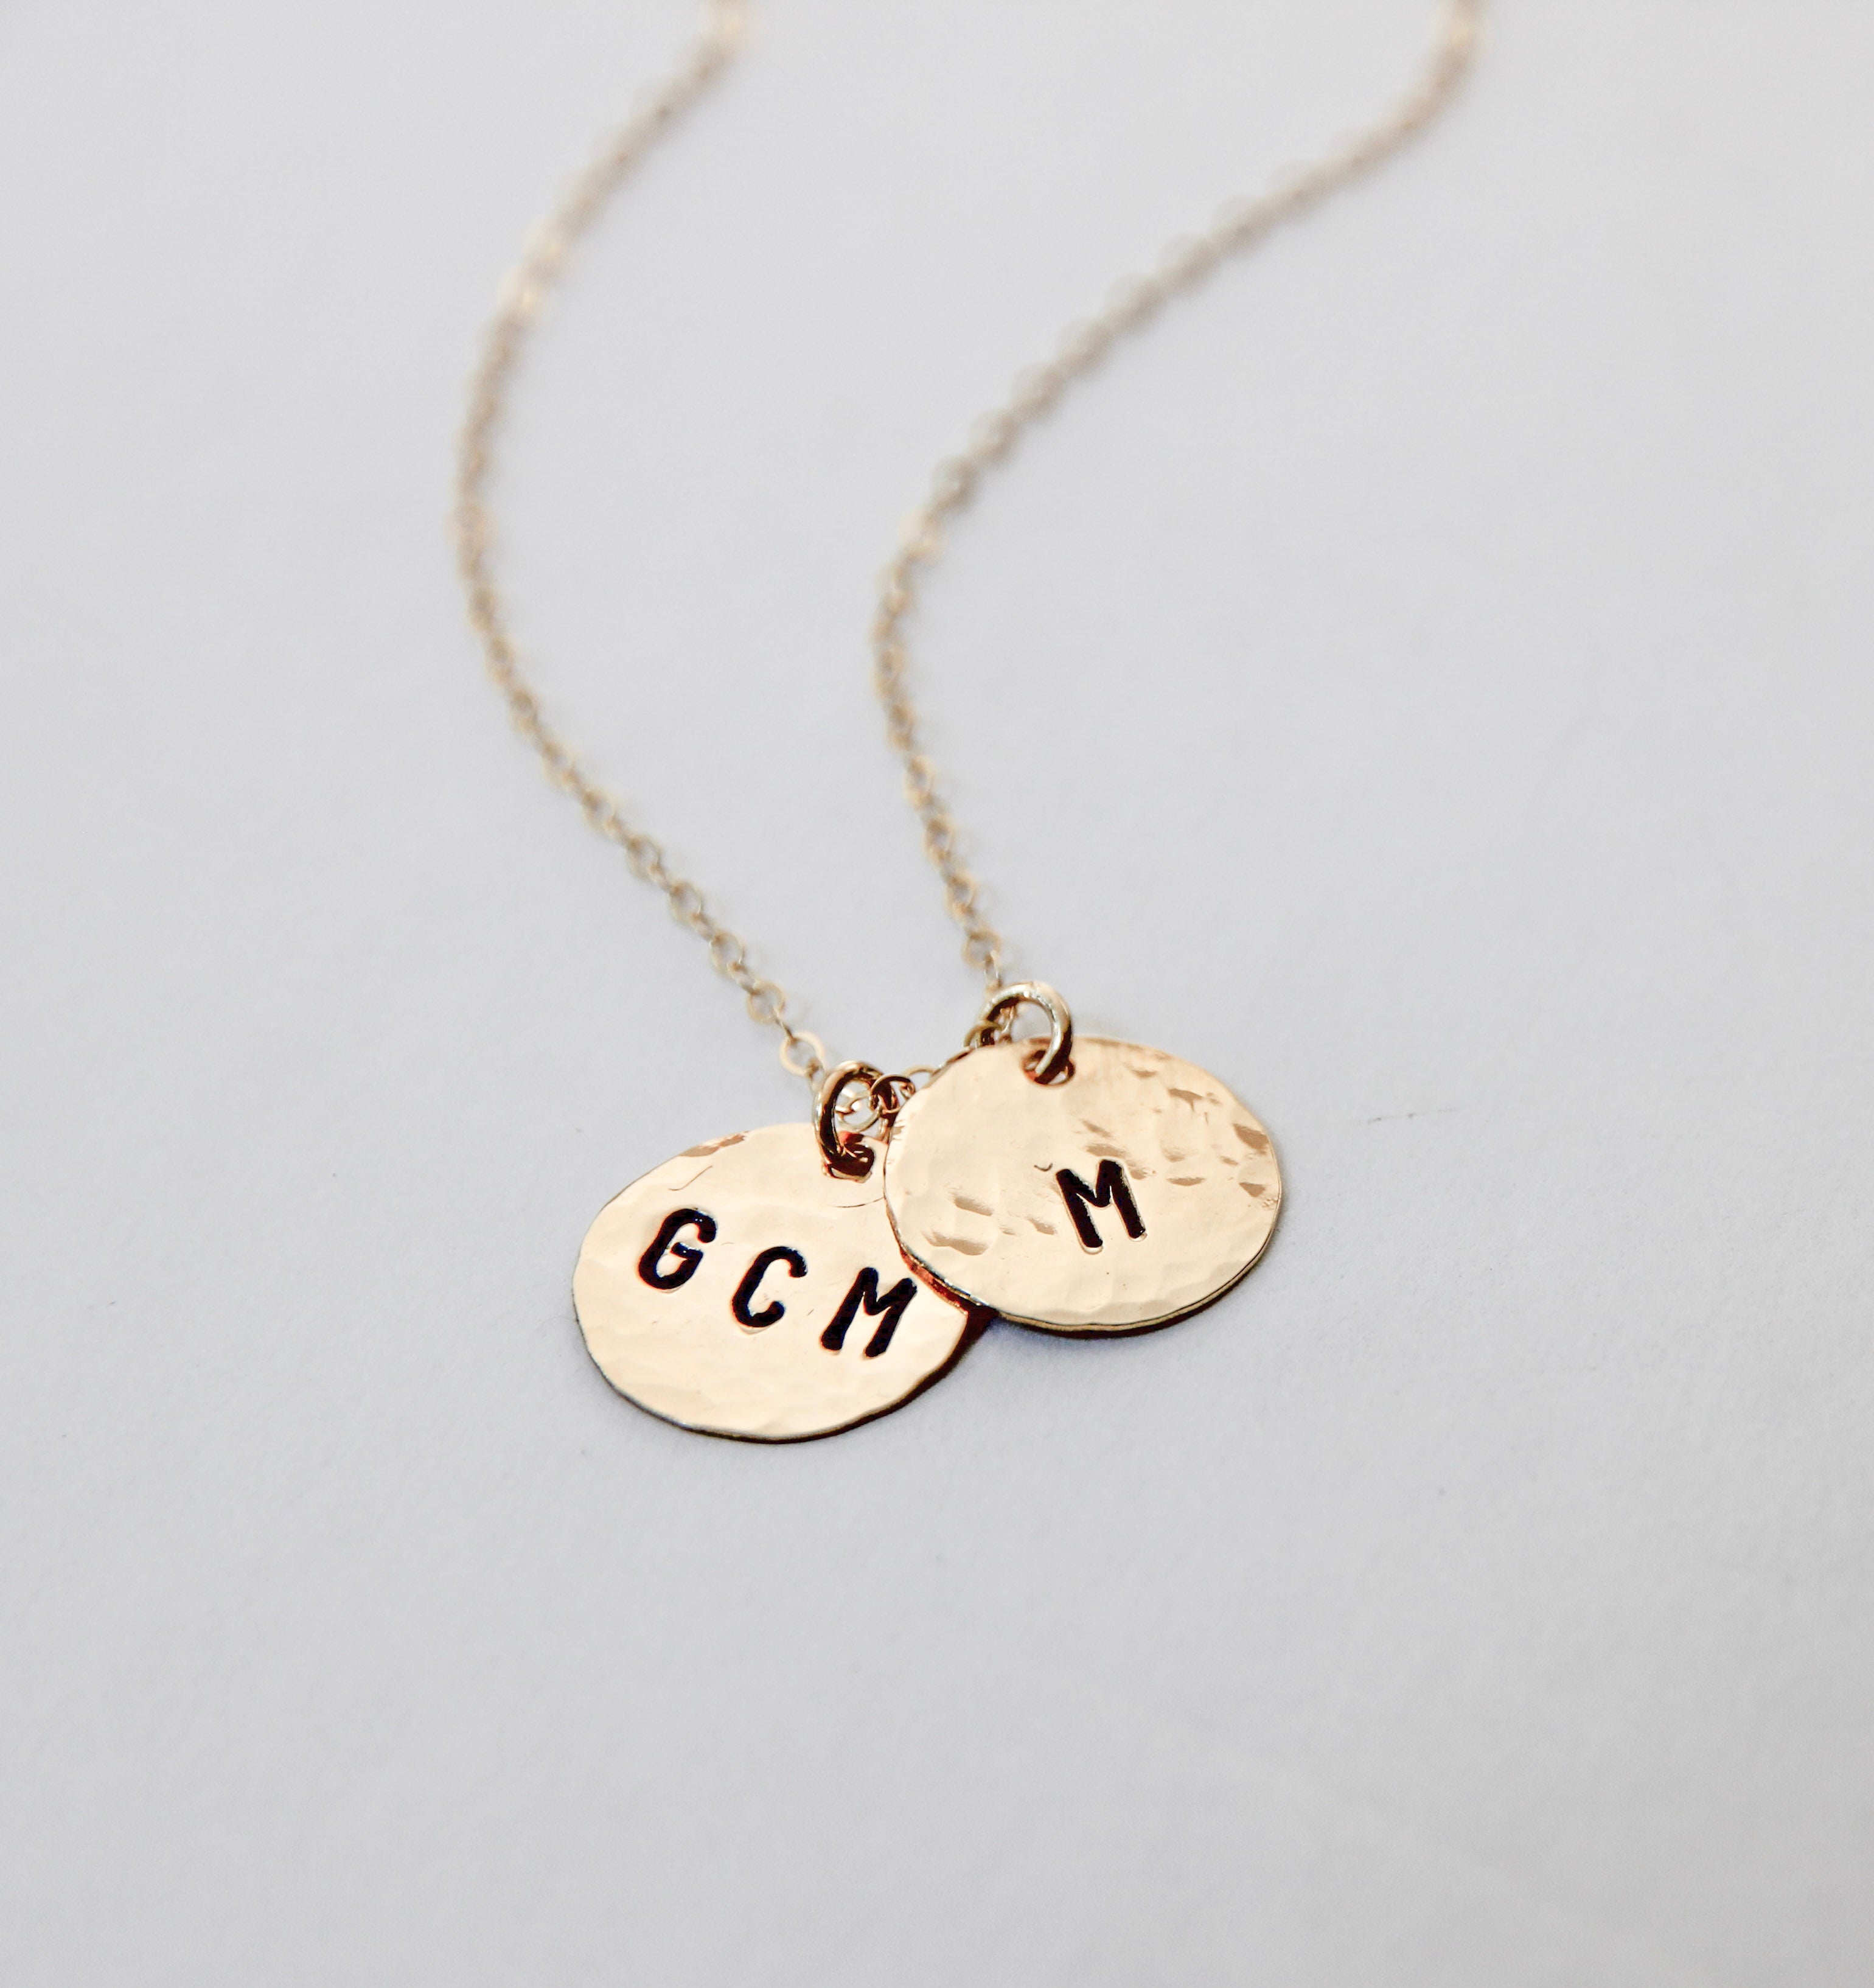 Medium size gold filled hammered circle with initials stamped onto it. On a gold chain. Shown with two charms. 